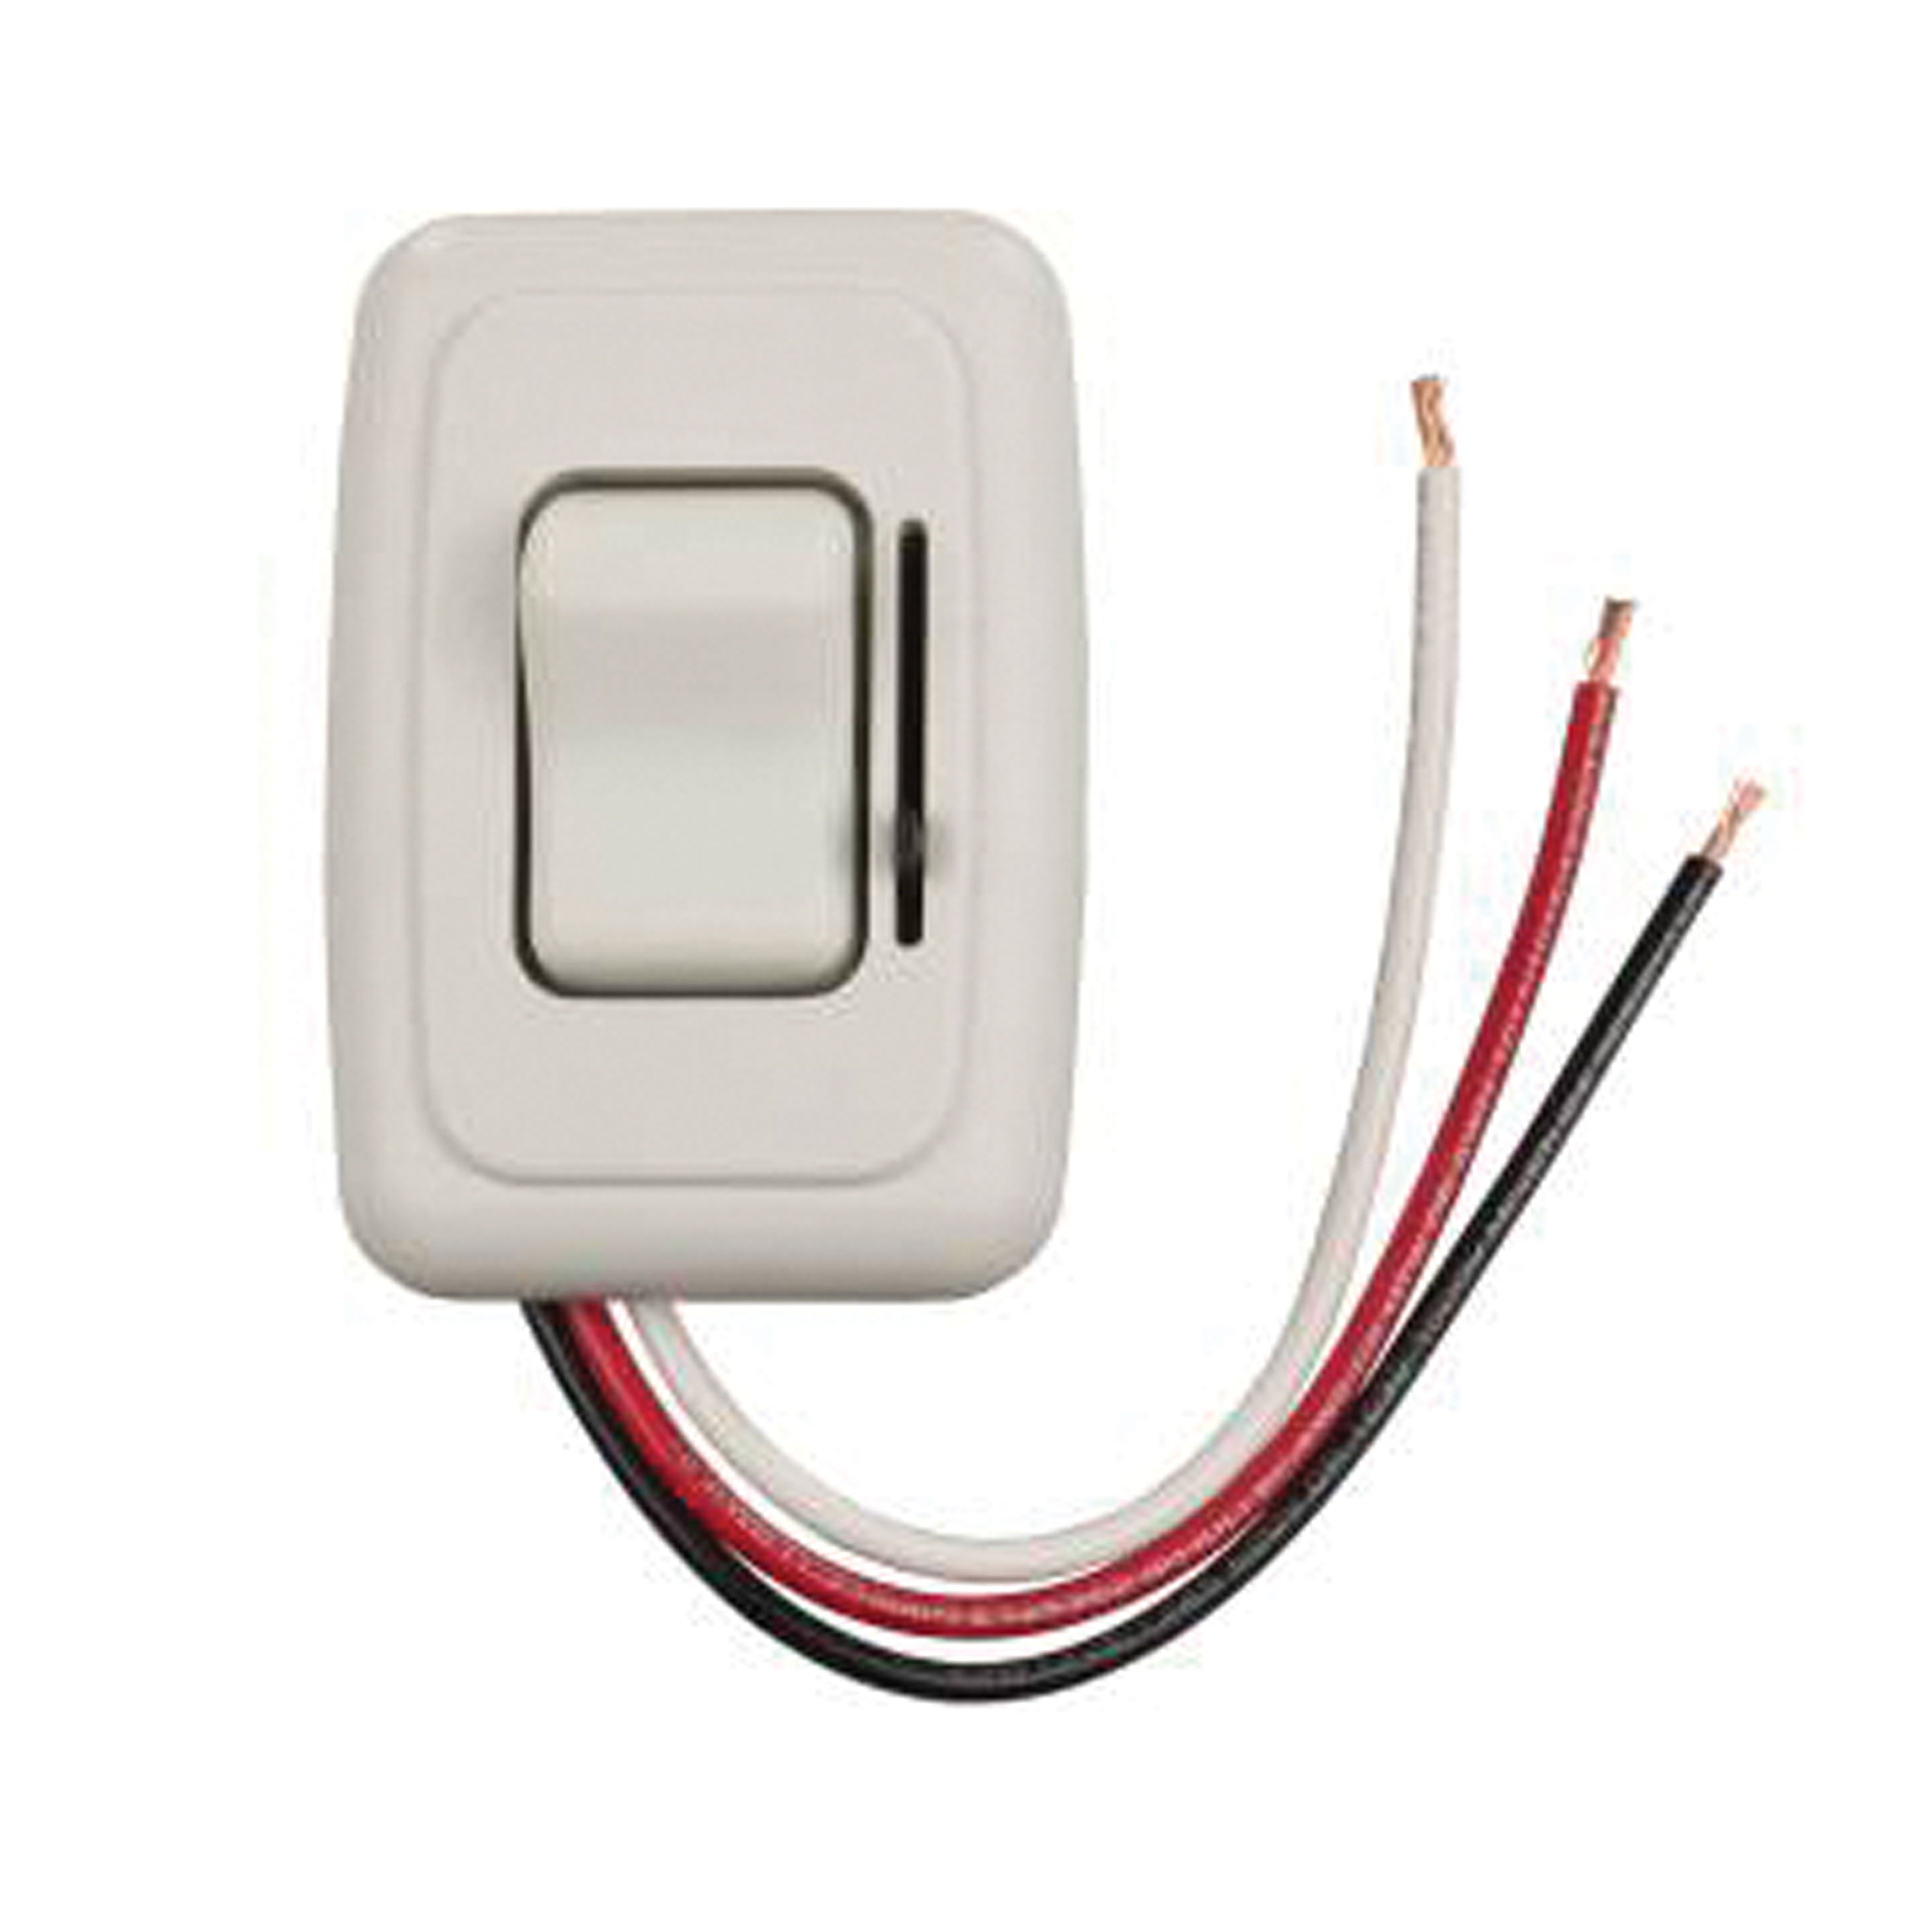 JR Products 05-12325 LED Side Slide Dimmer Switch - White